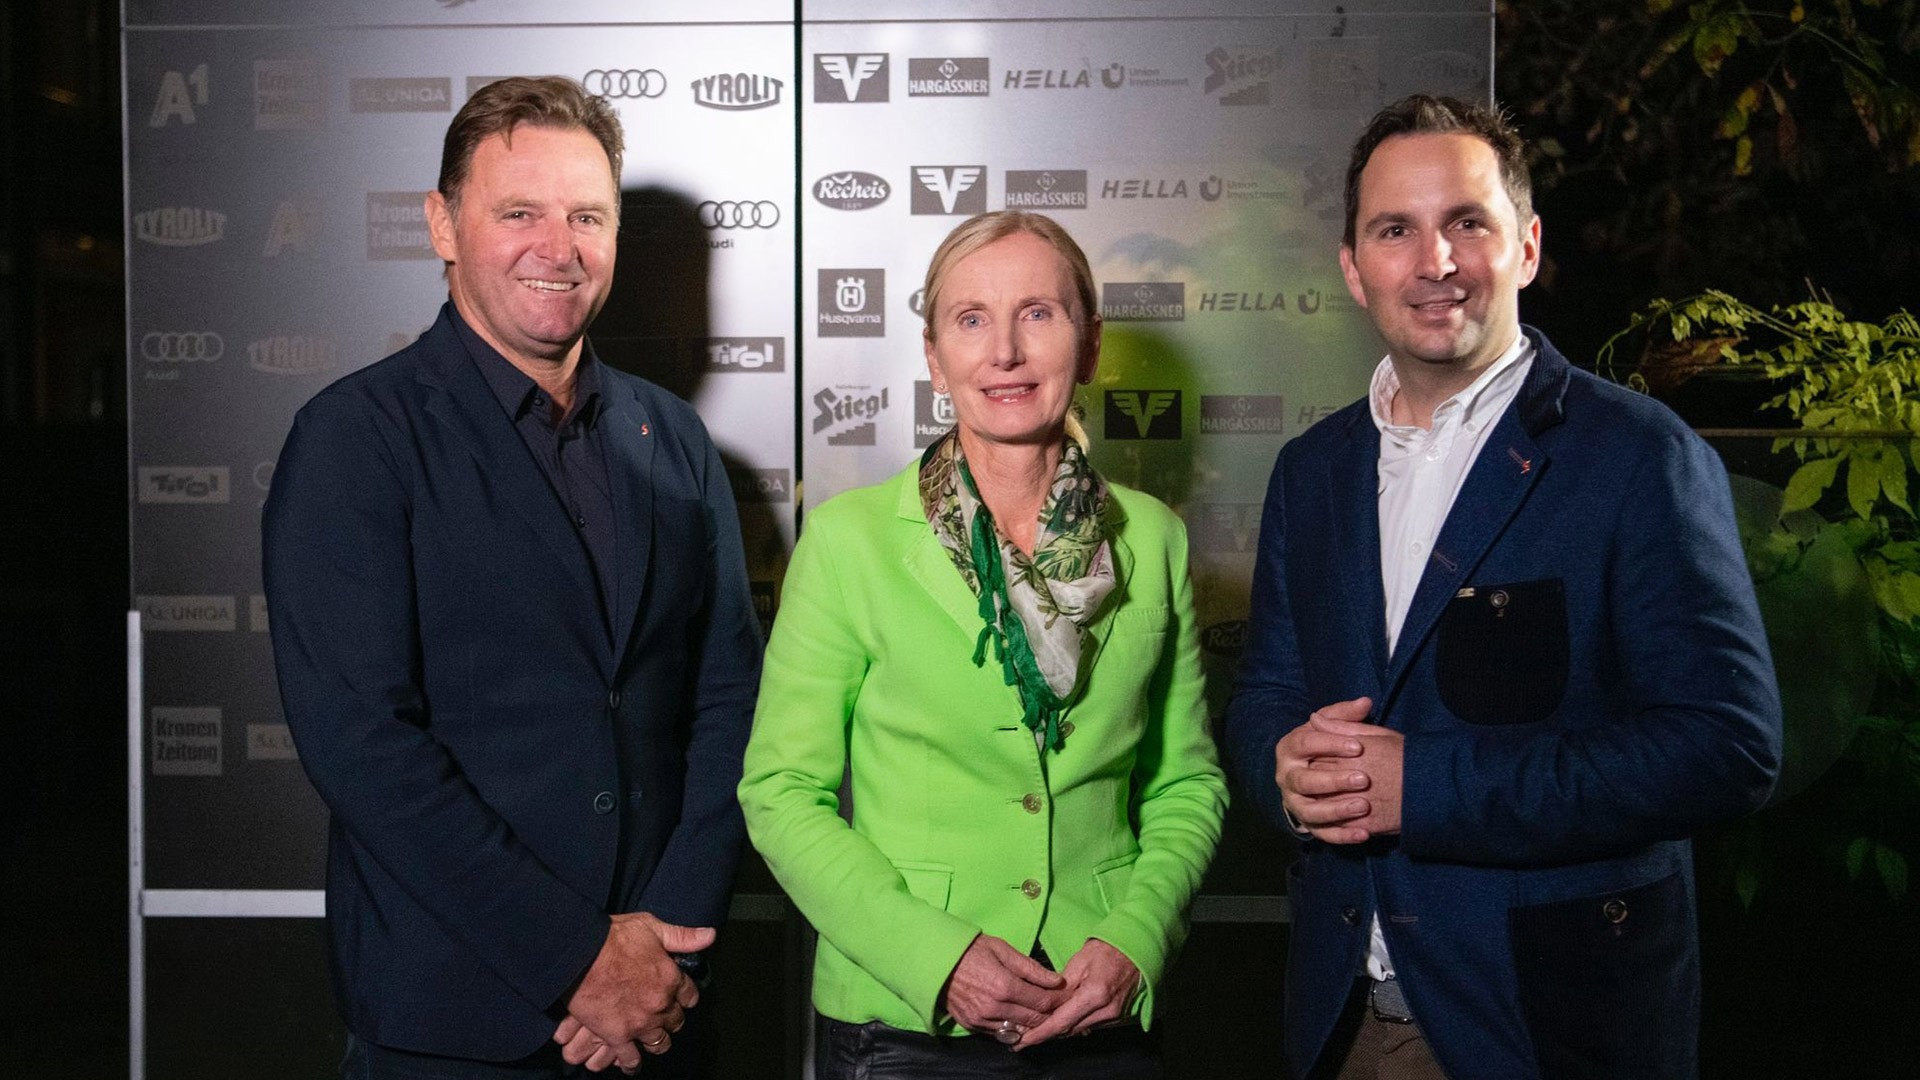 Roswitha Stadlober, centre, will lead the Austrian Ski Federation as President along with financial officer Patrick Ortlie, left, and general secretary Christian Scherer, right ©ÖSV